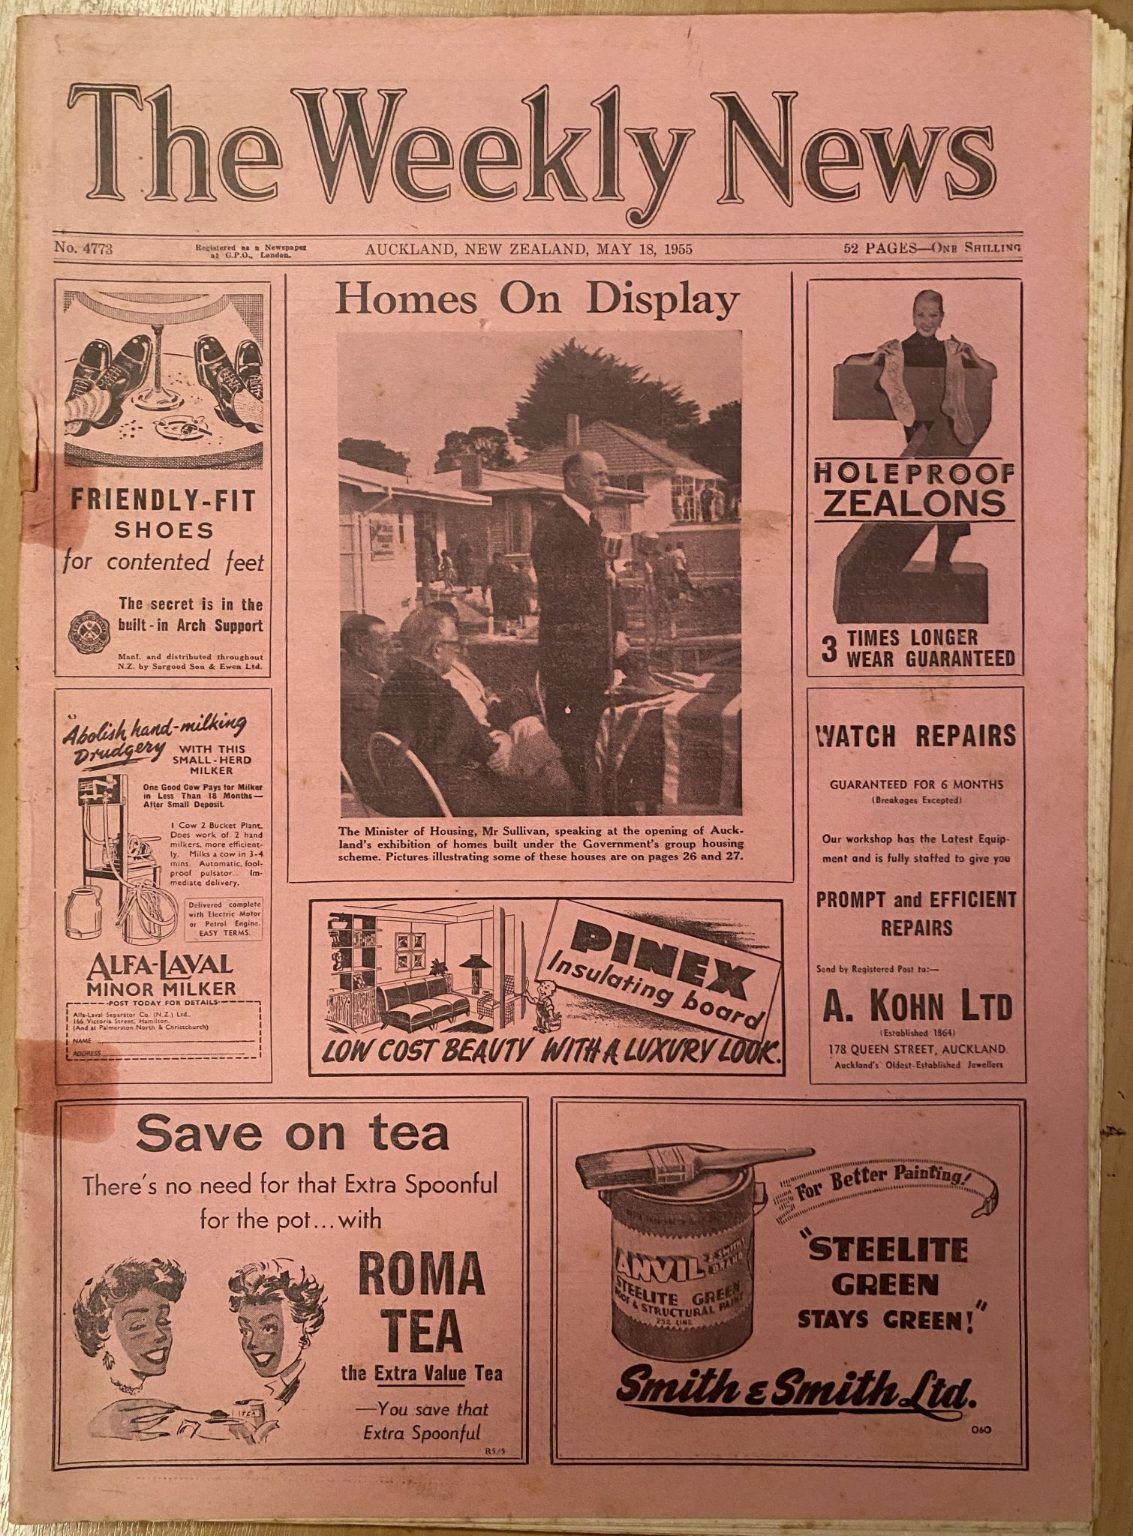 OLD NEWSPAPER: The Weekly News - No. 4773, 18 May 1955